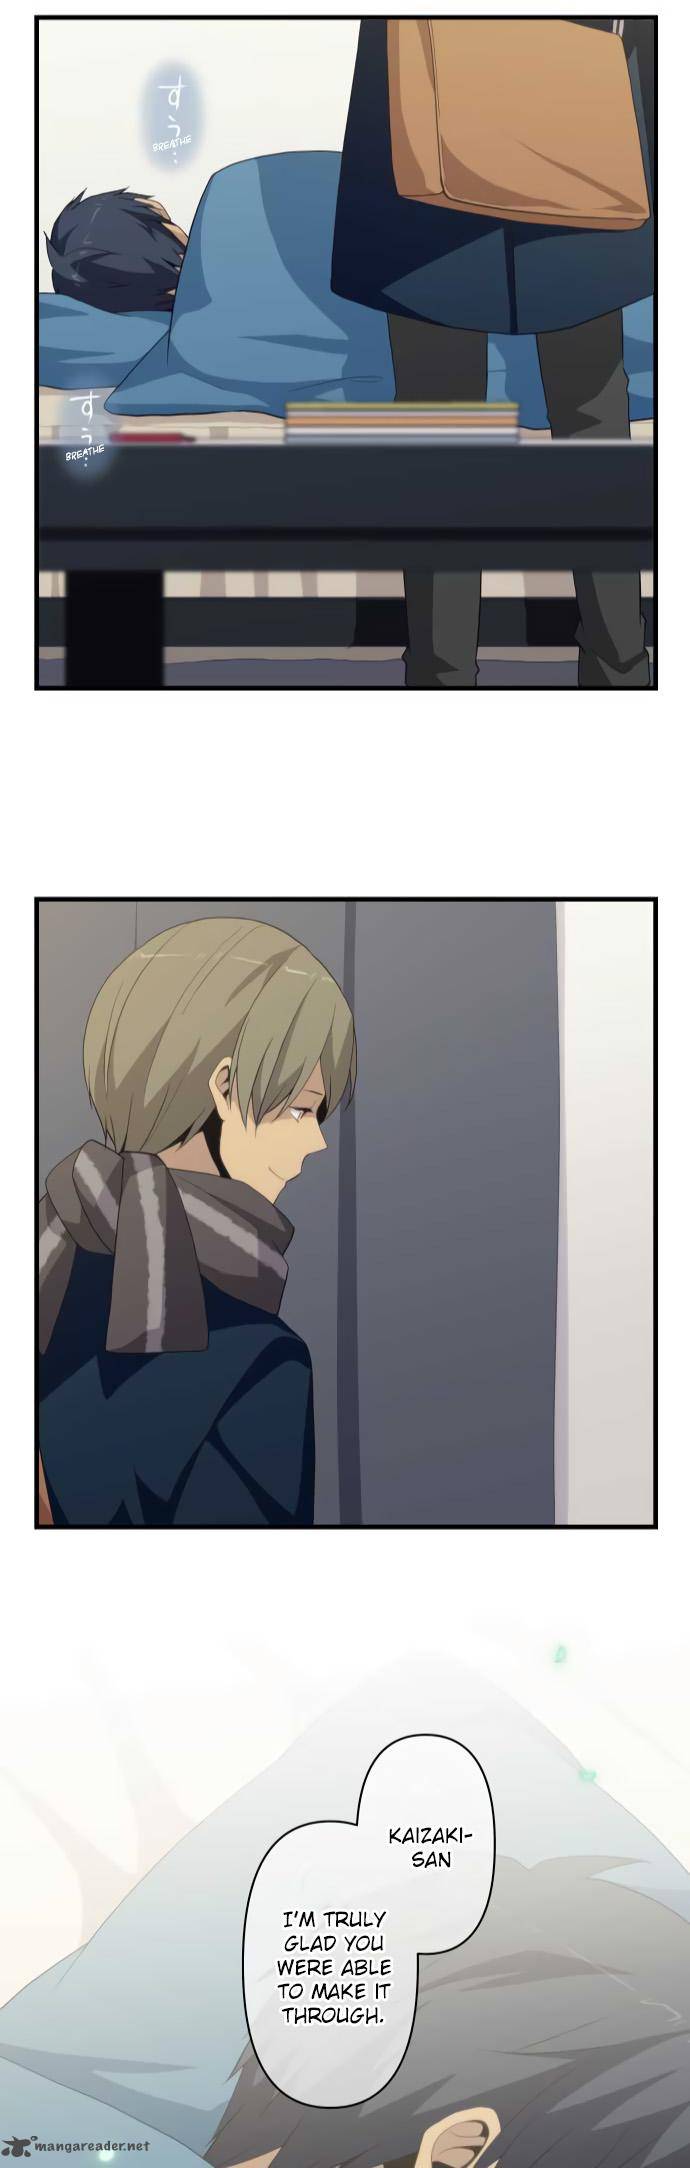 relife_214_23